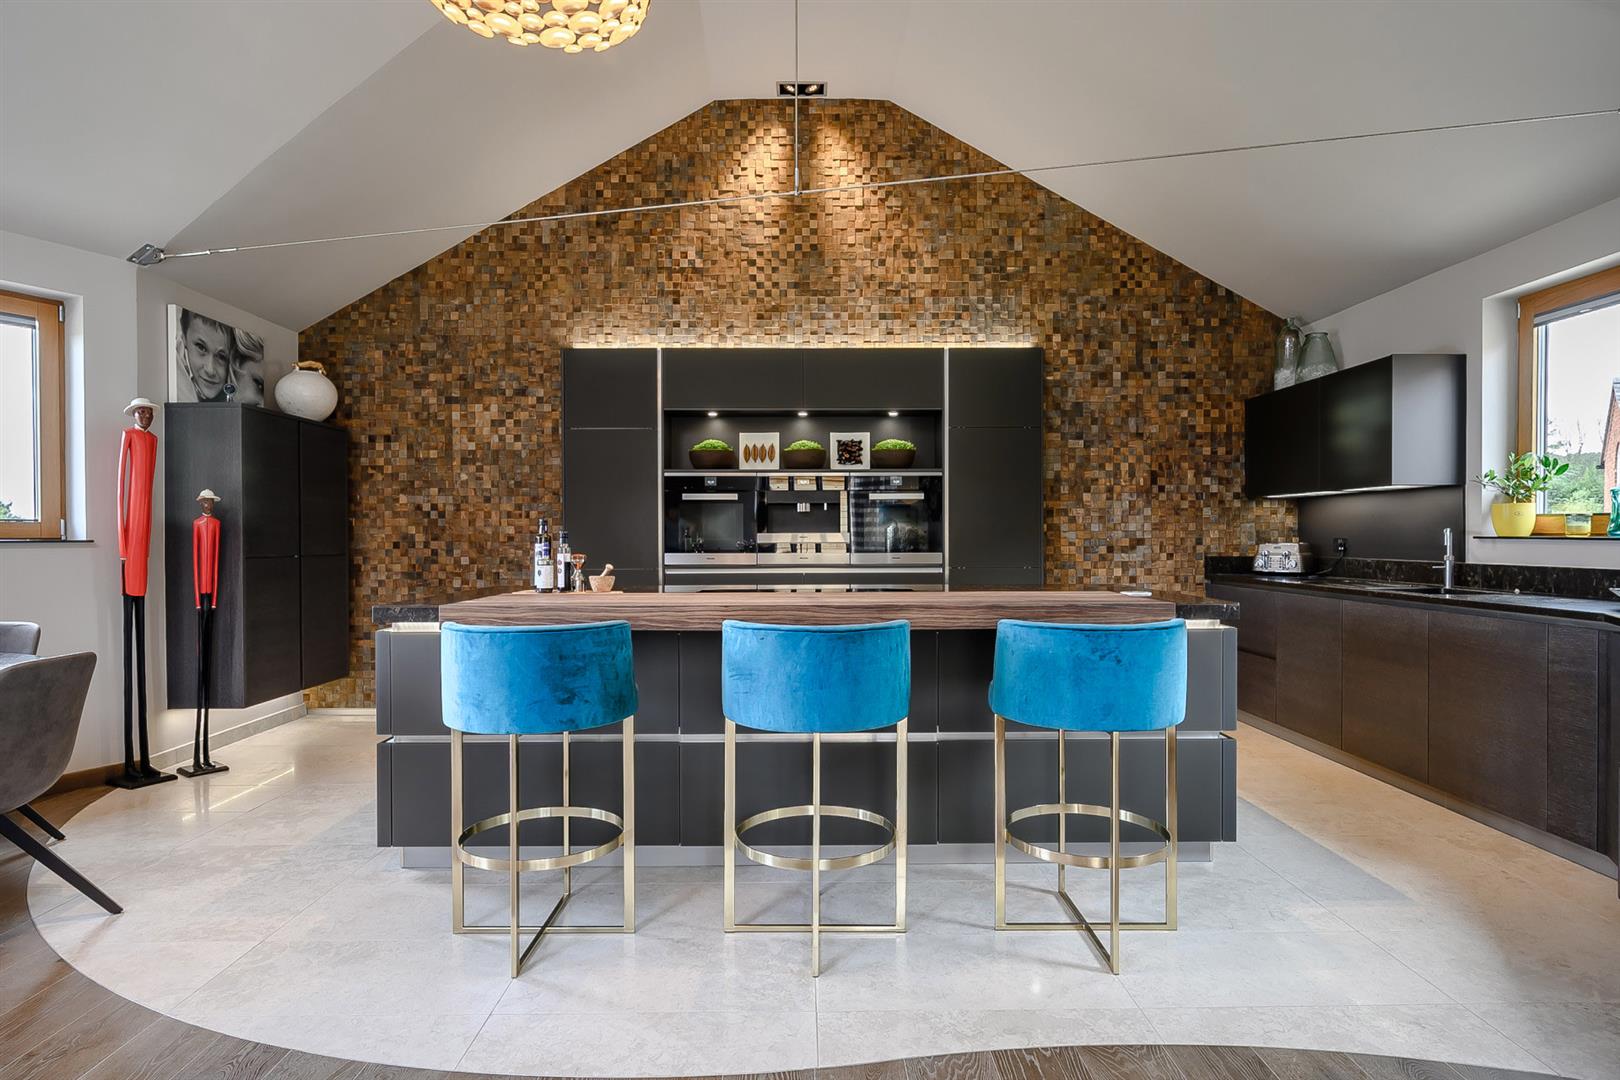 Stunning Contemporary kitchen with blue chairs modern island